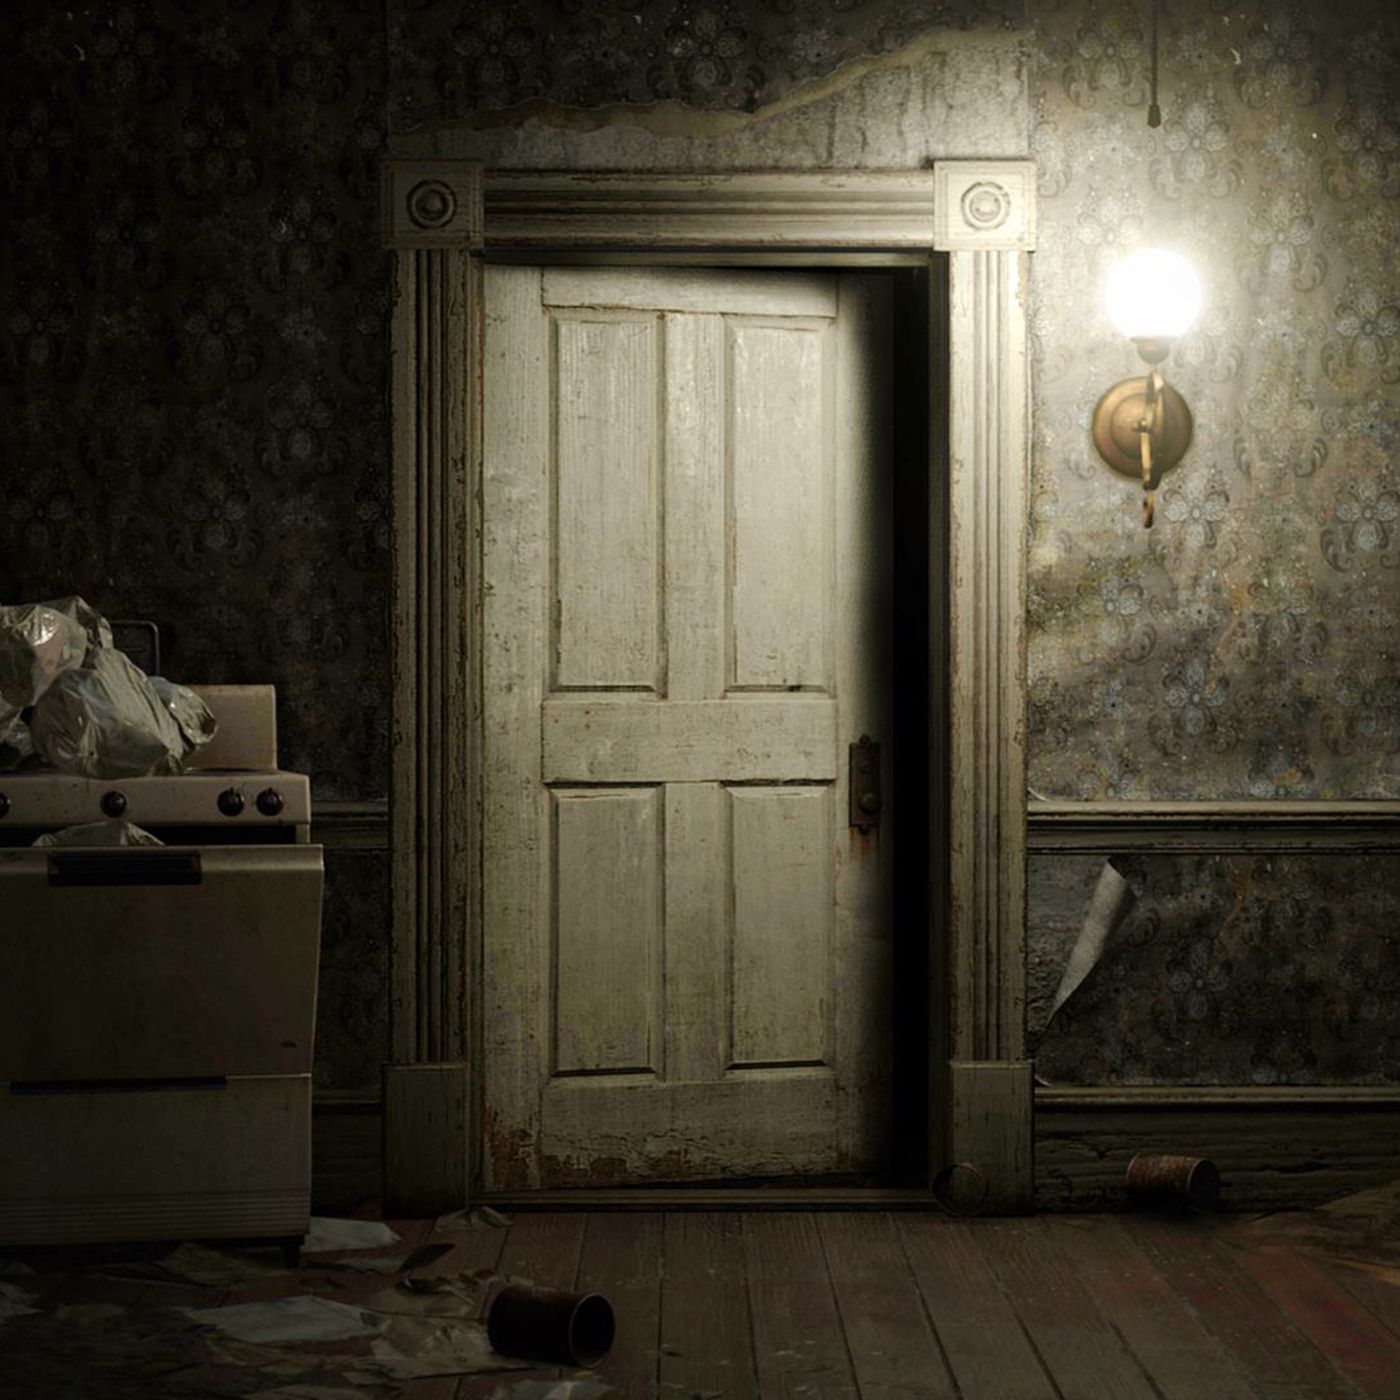 To Make Resident Evil 7 Less Scary Capcom Says You Should Make